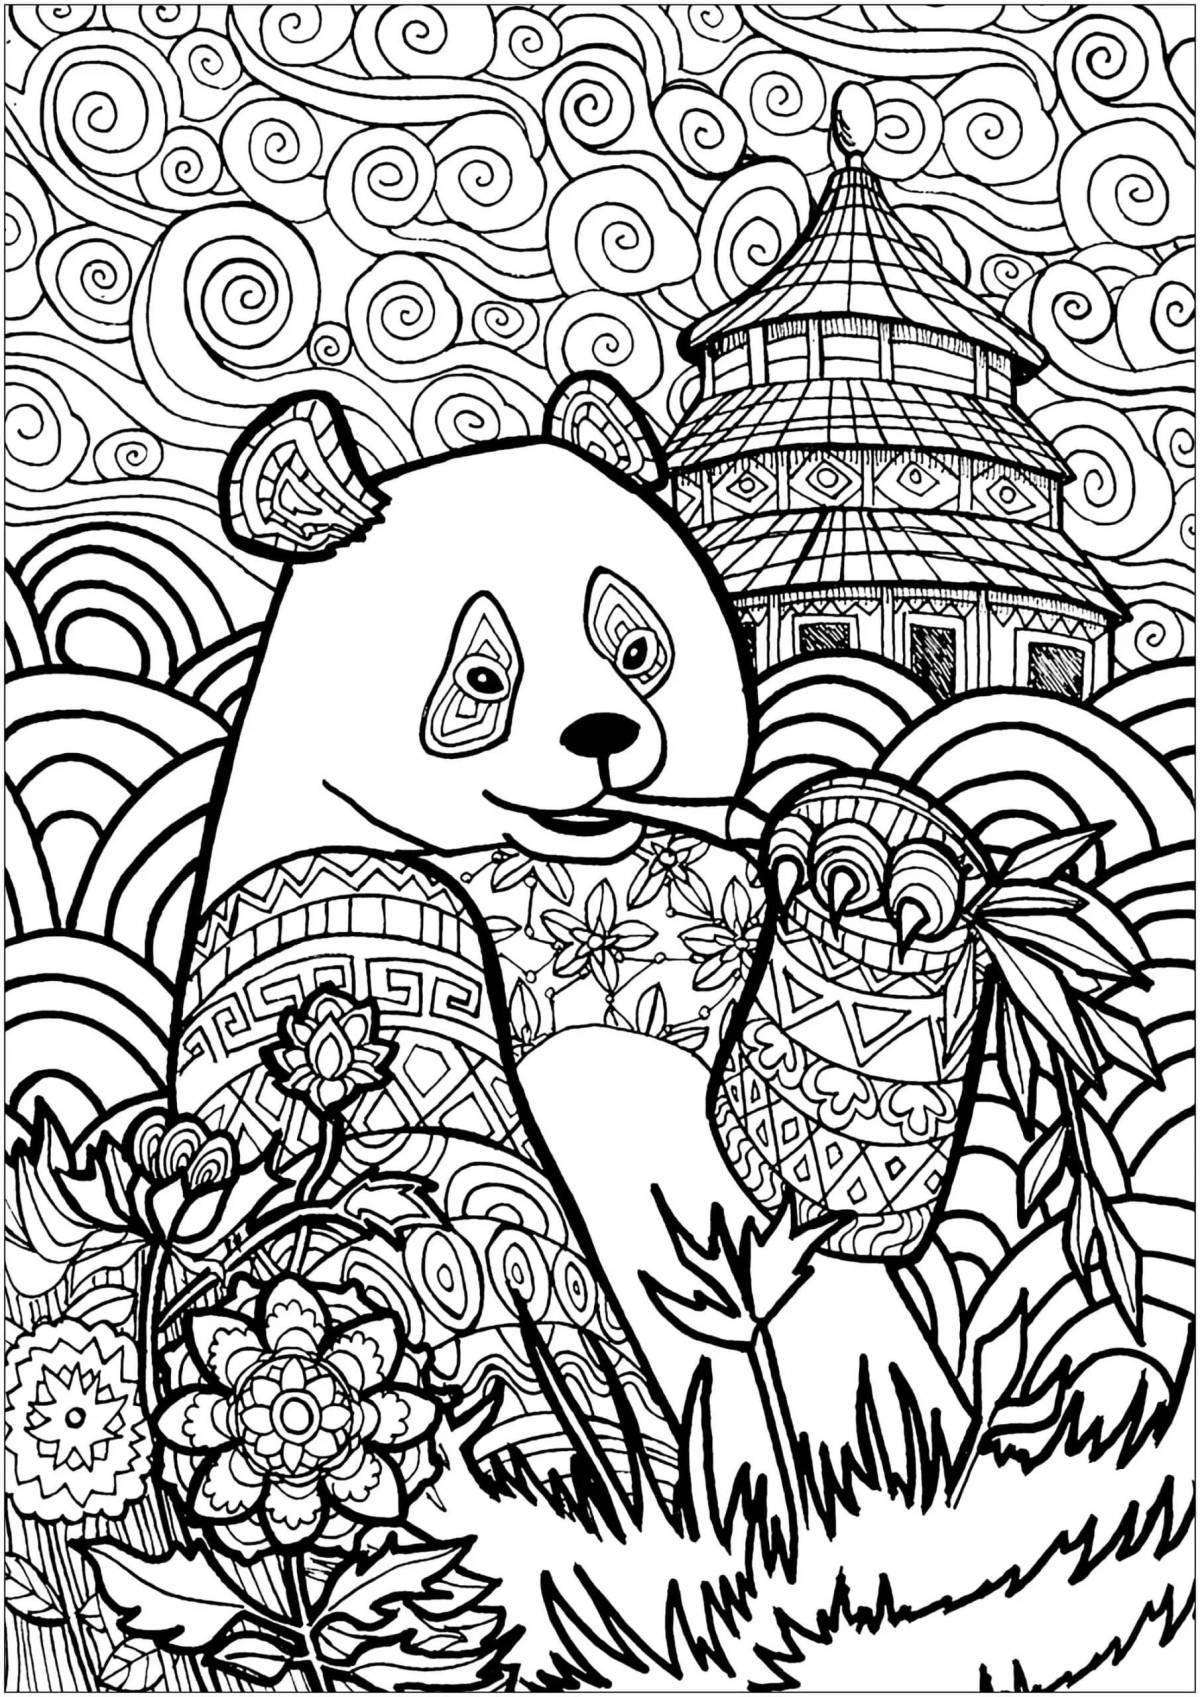 Great adult coloring book, large